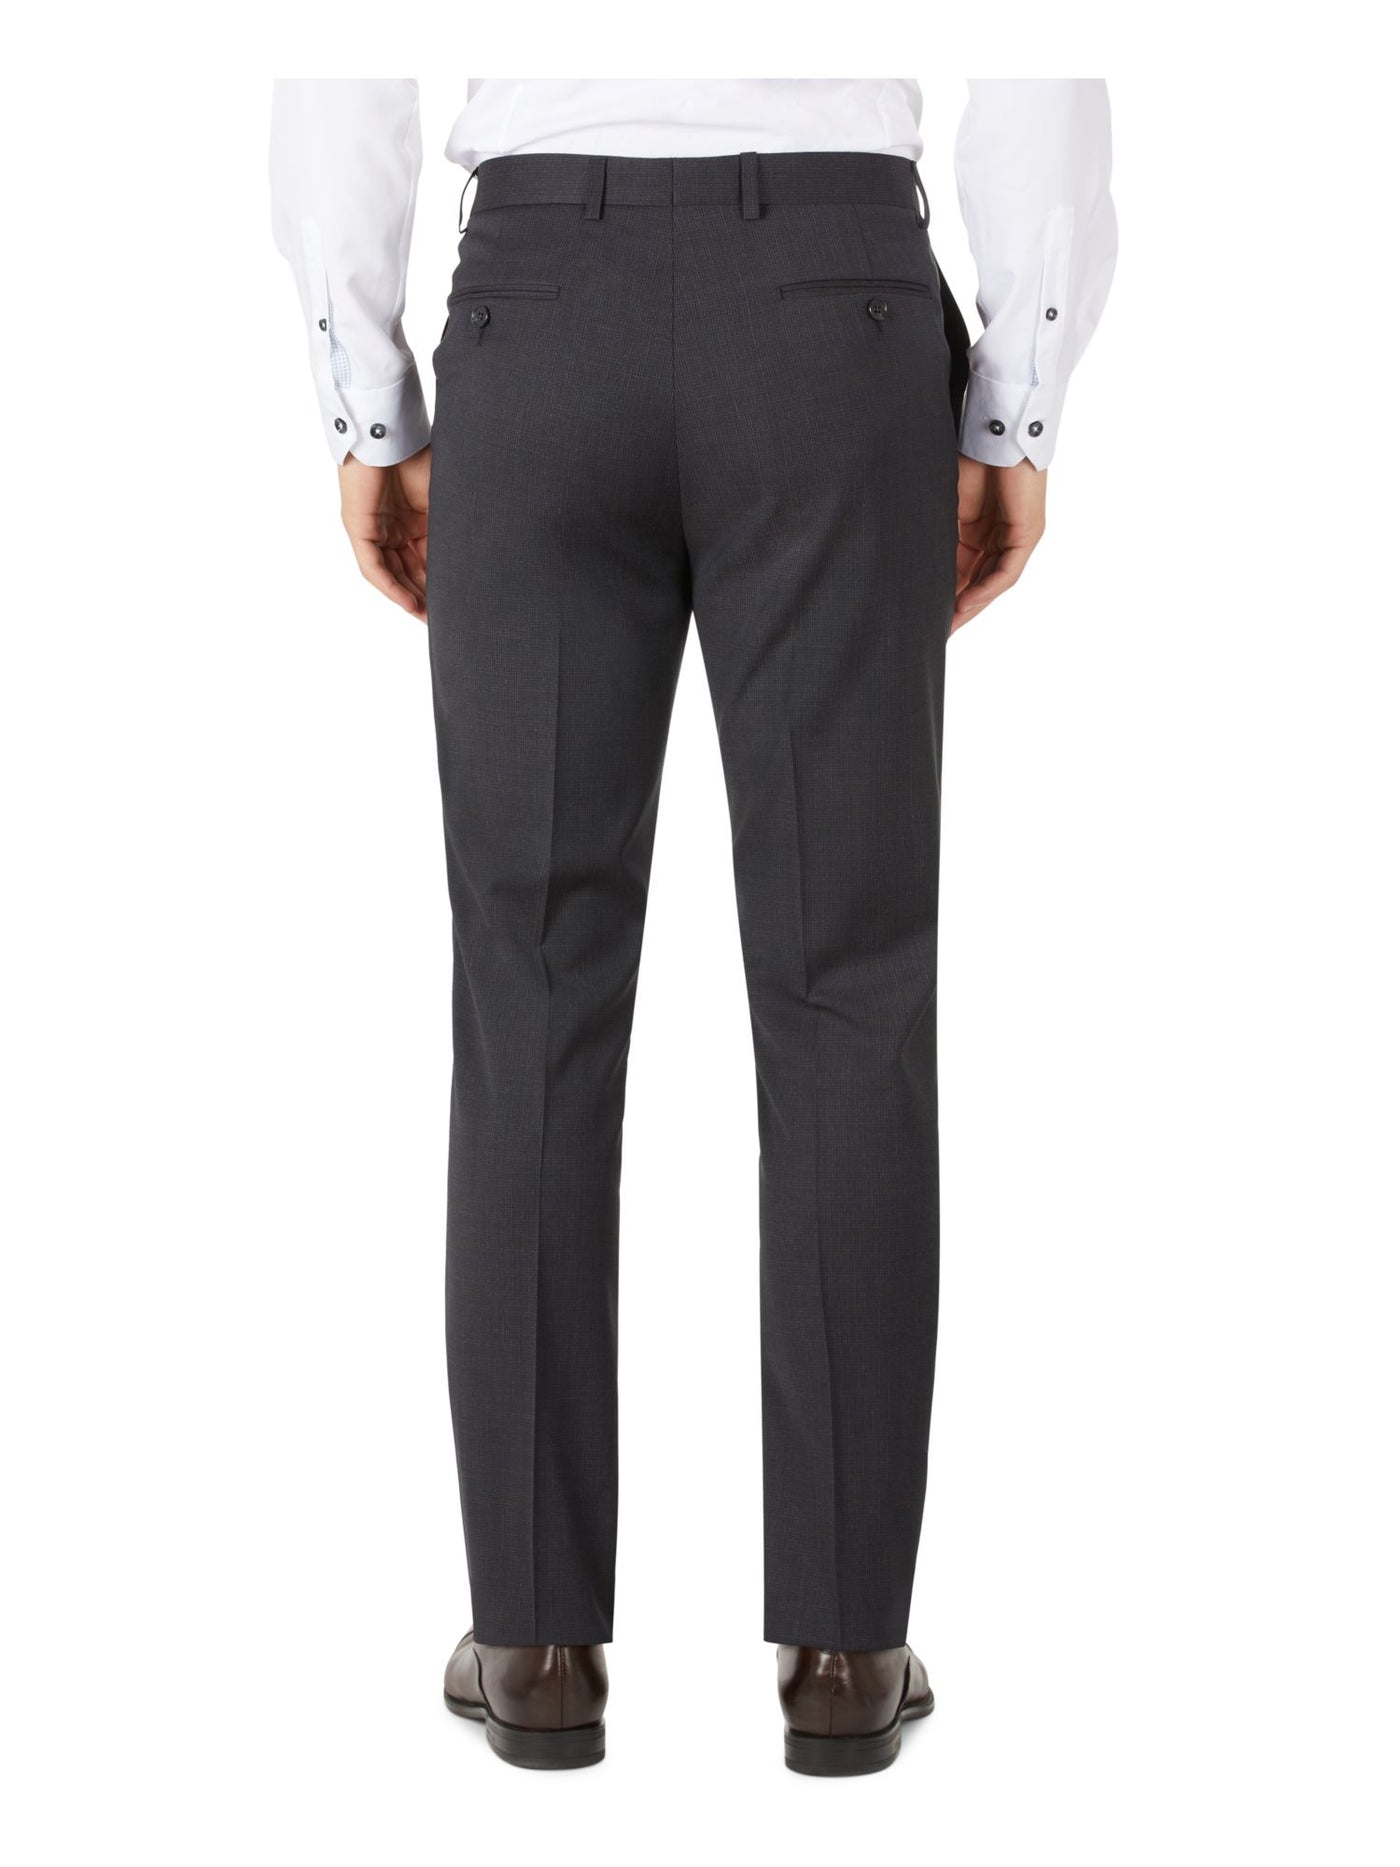 CALVIN KLEIN Mens Gray Flat Front, Stretch, Skinny Fit Wool Blend Suit Separate Pants 34X34